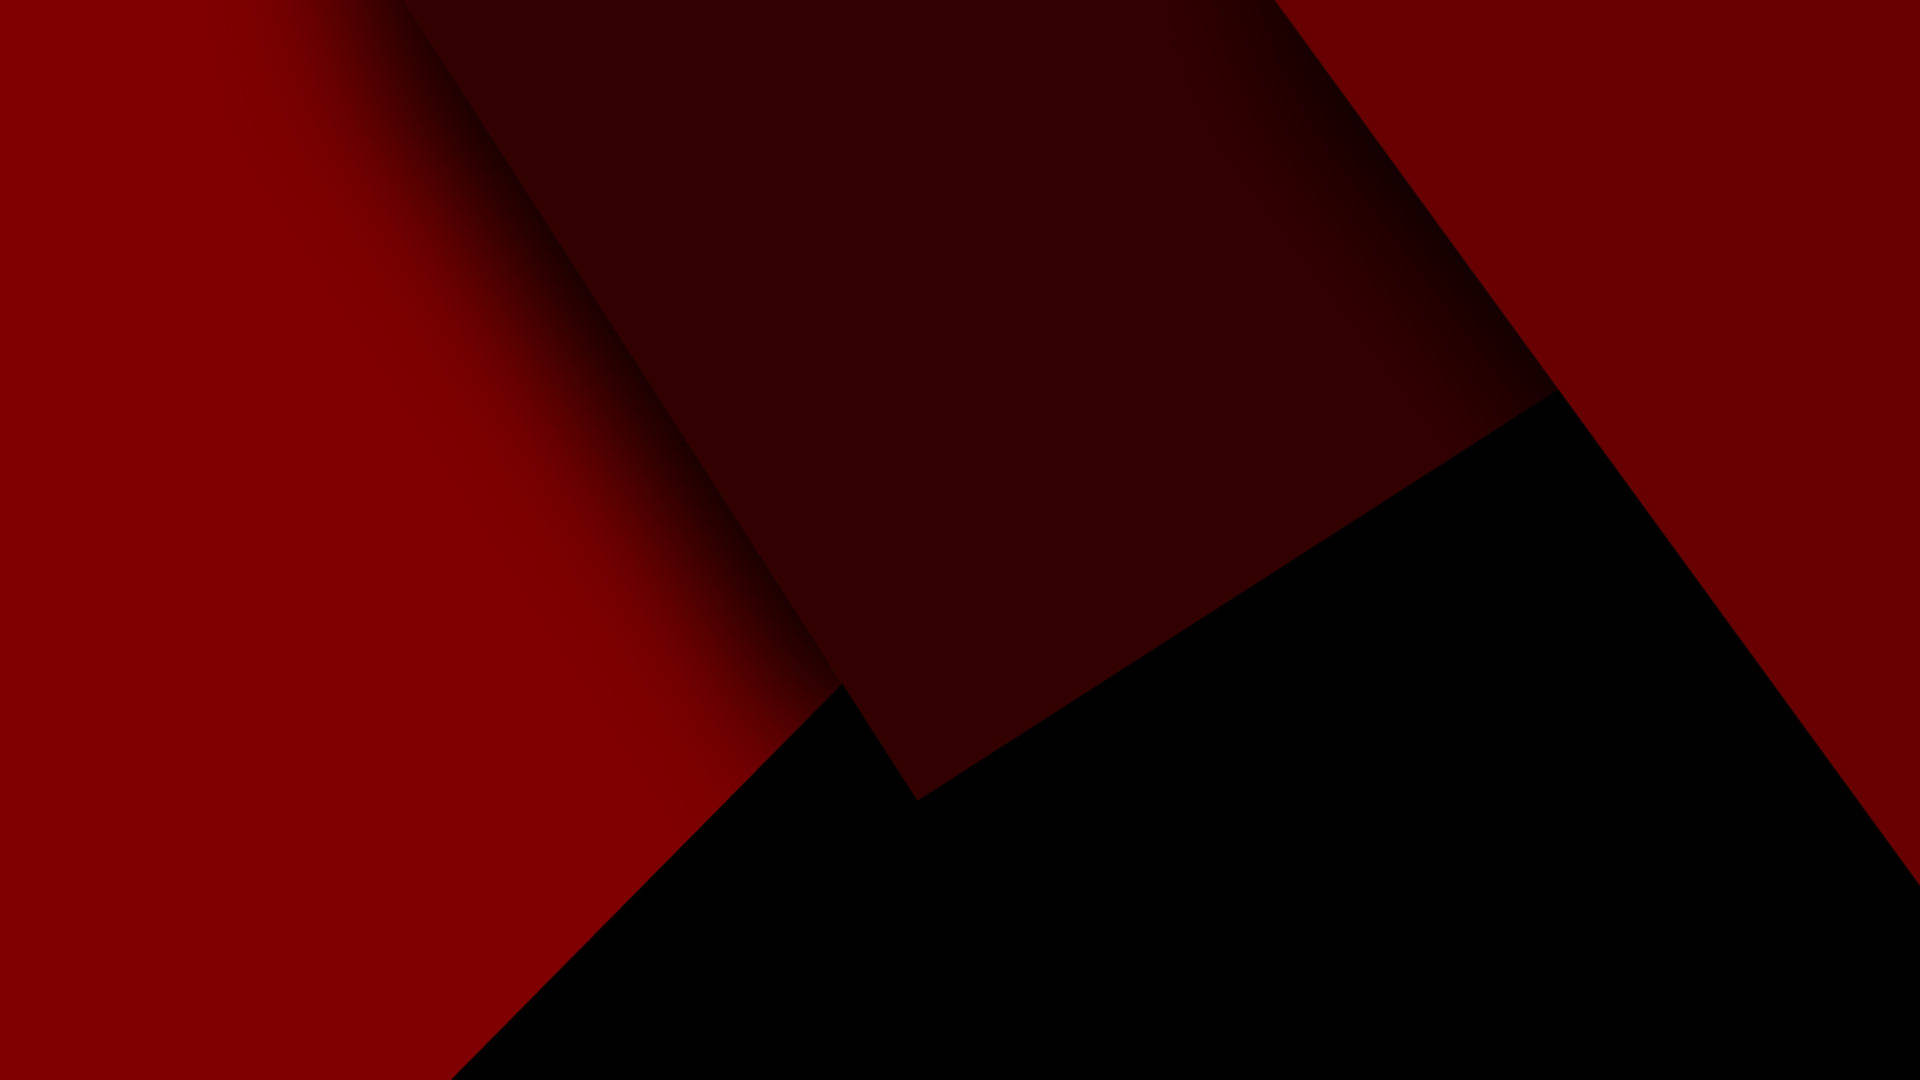 Geometric Maroon, Black, Red Abstract Art Picture